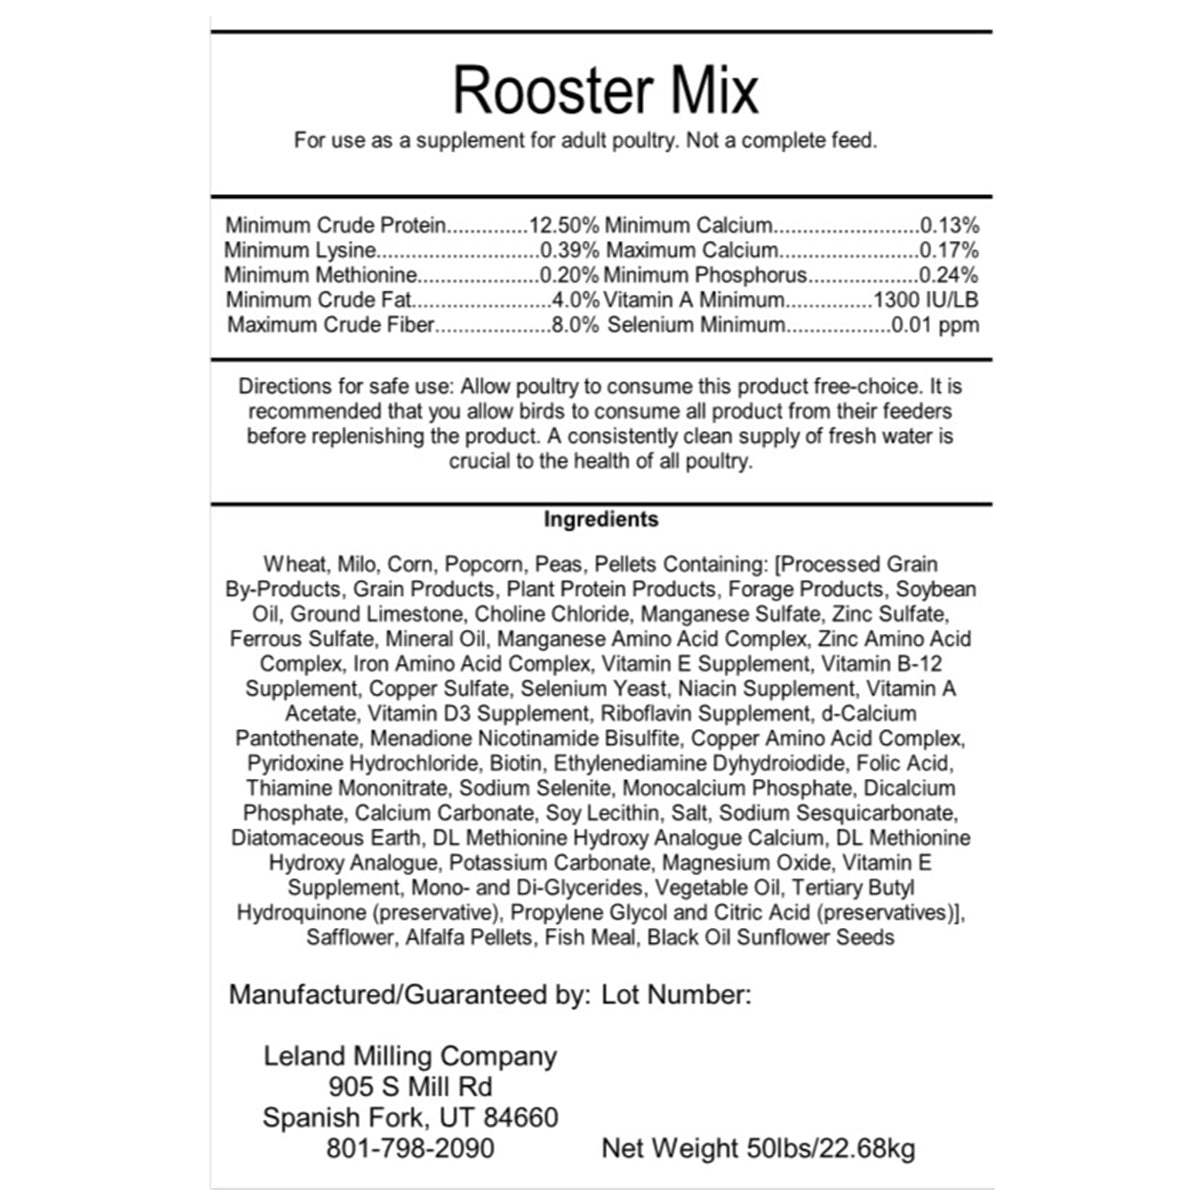 Rooster Mix